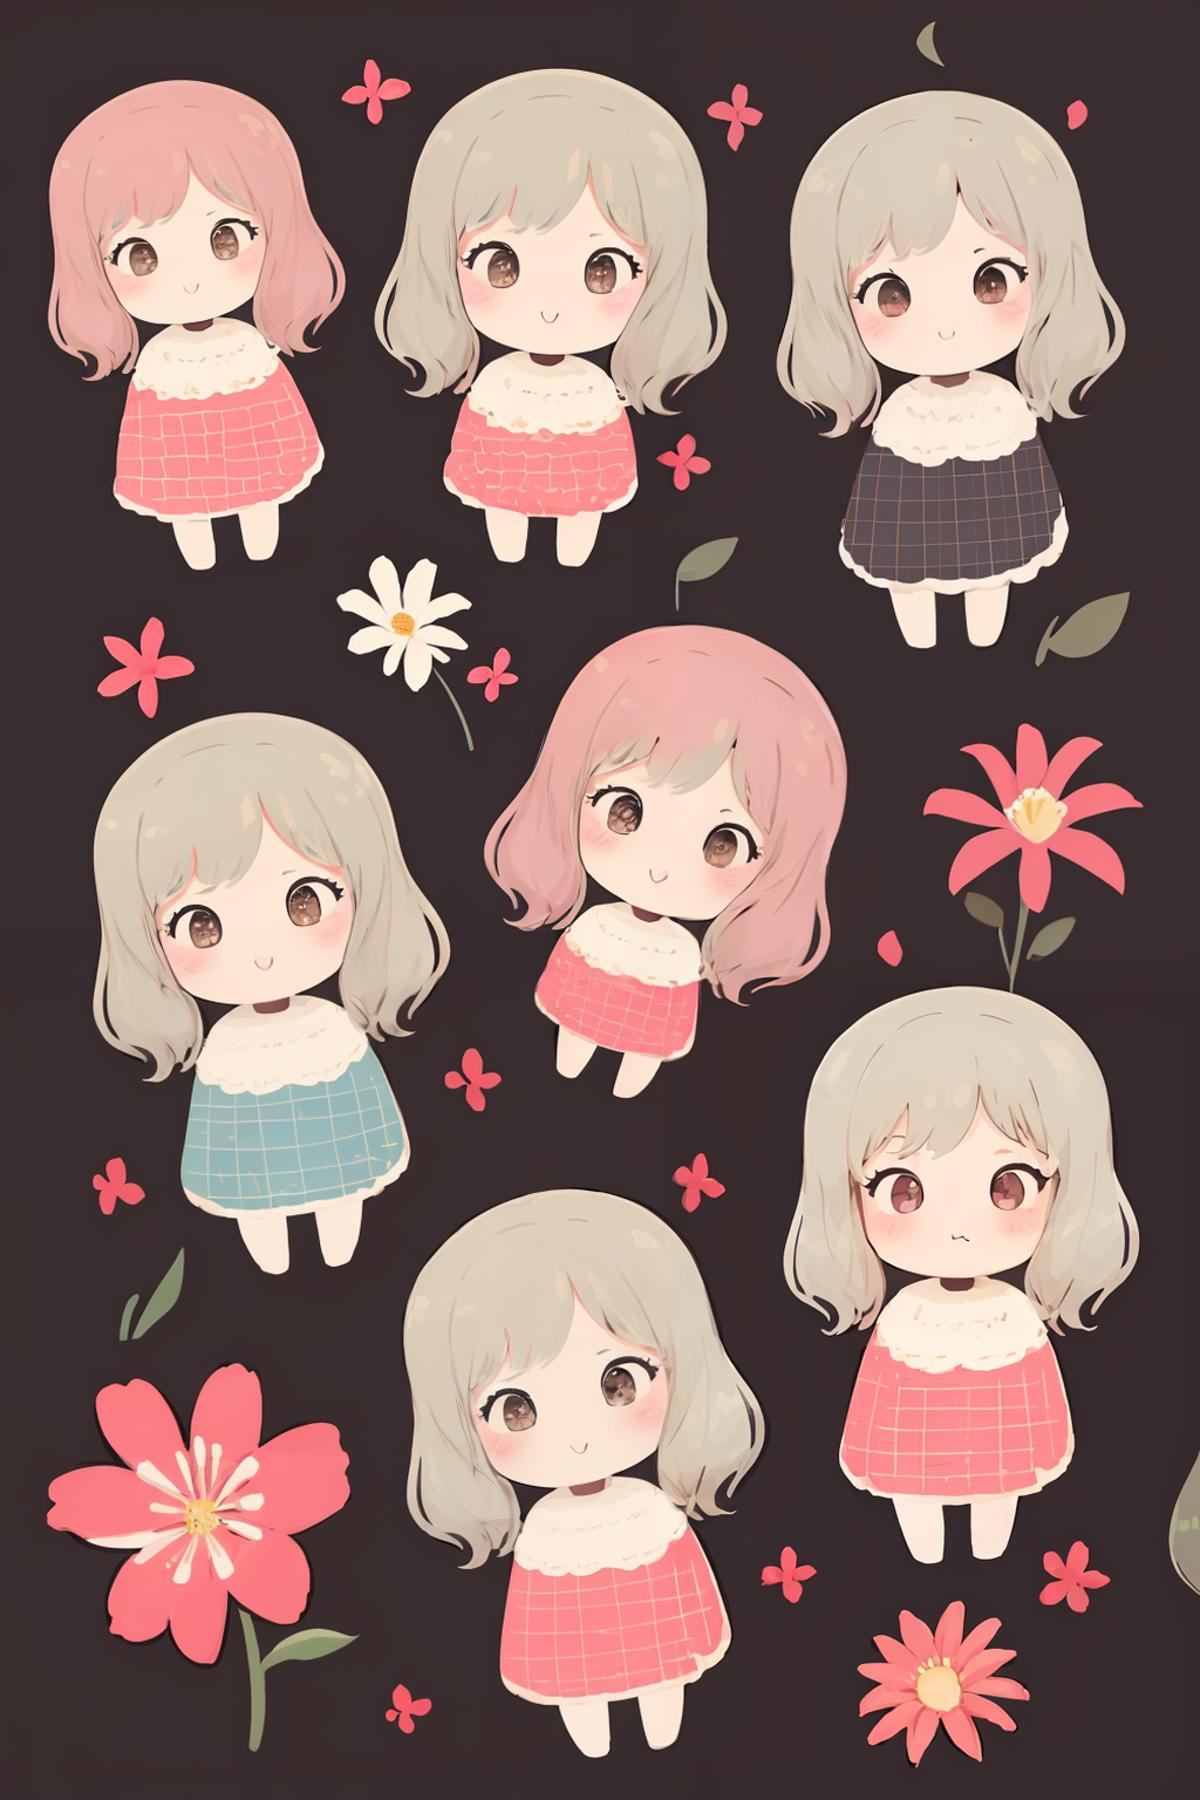 A collection of cute girl illustrations with flowers.